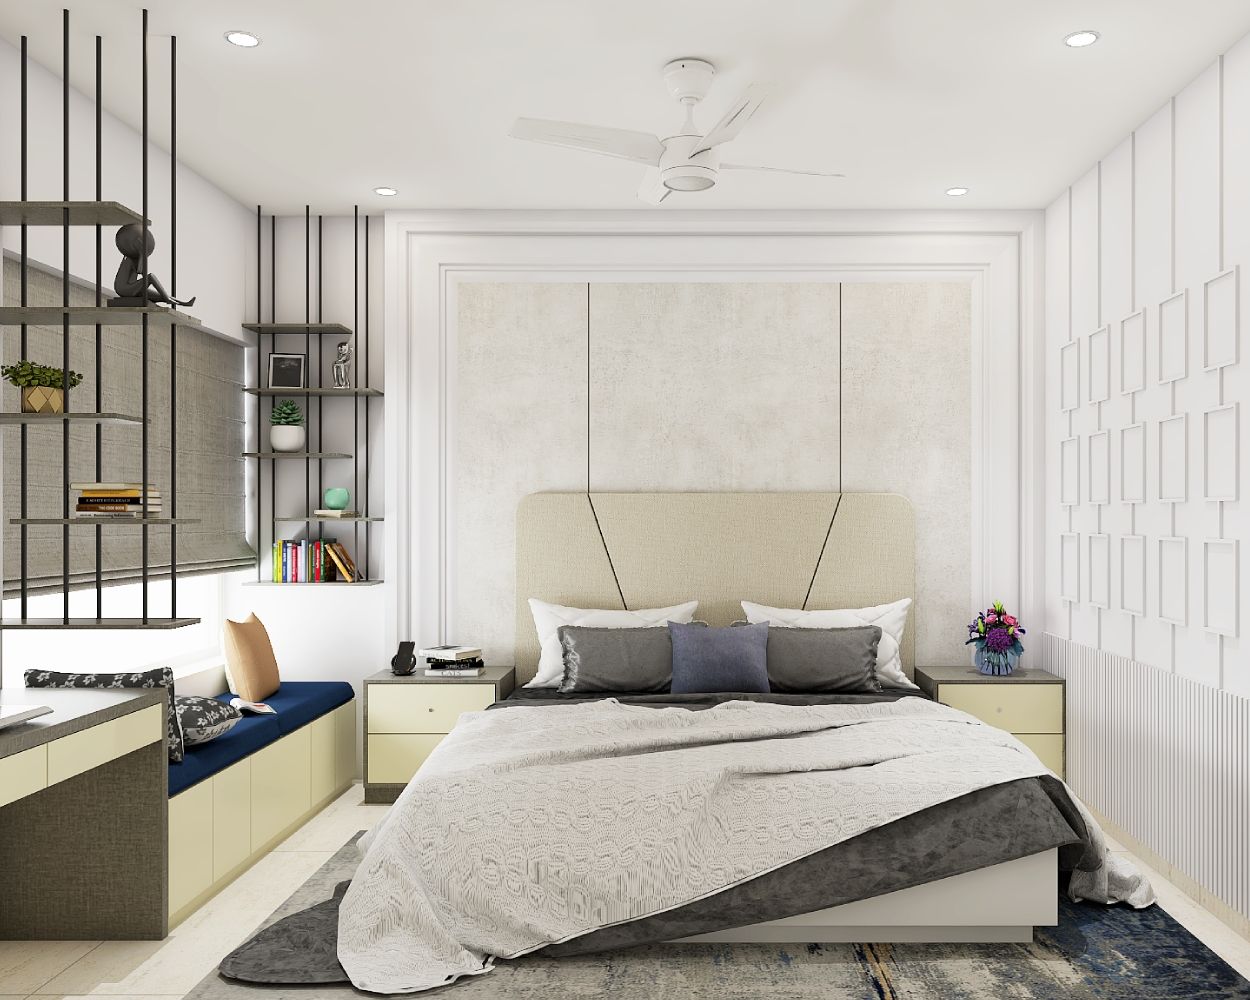 Modern Guest Room Design With Beige Queen-Size Bed And Suspended Grey Ceiling Storage Racks